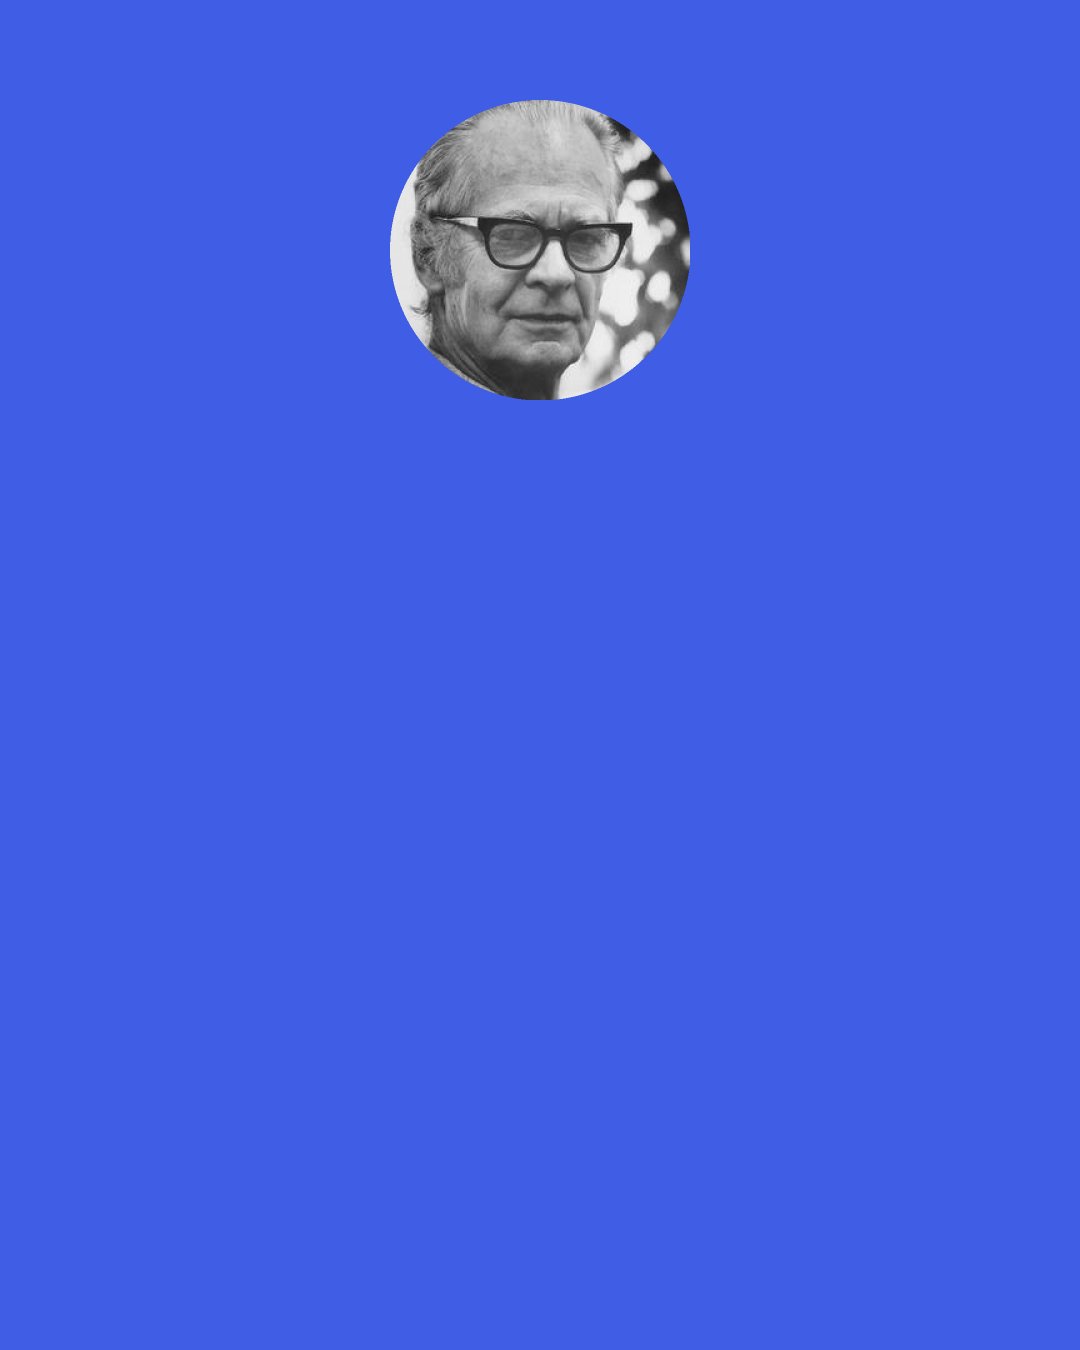 B. F. Skinner: Many instructional arrangements seem "contrived," but there is nothing wrong with that. It is the teacher's function to contrive conditions under which students learn. It has always been the task of formal education to set up behavior which would prove useful or enjoyable later in a student's life.